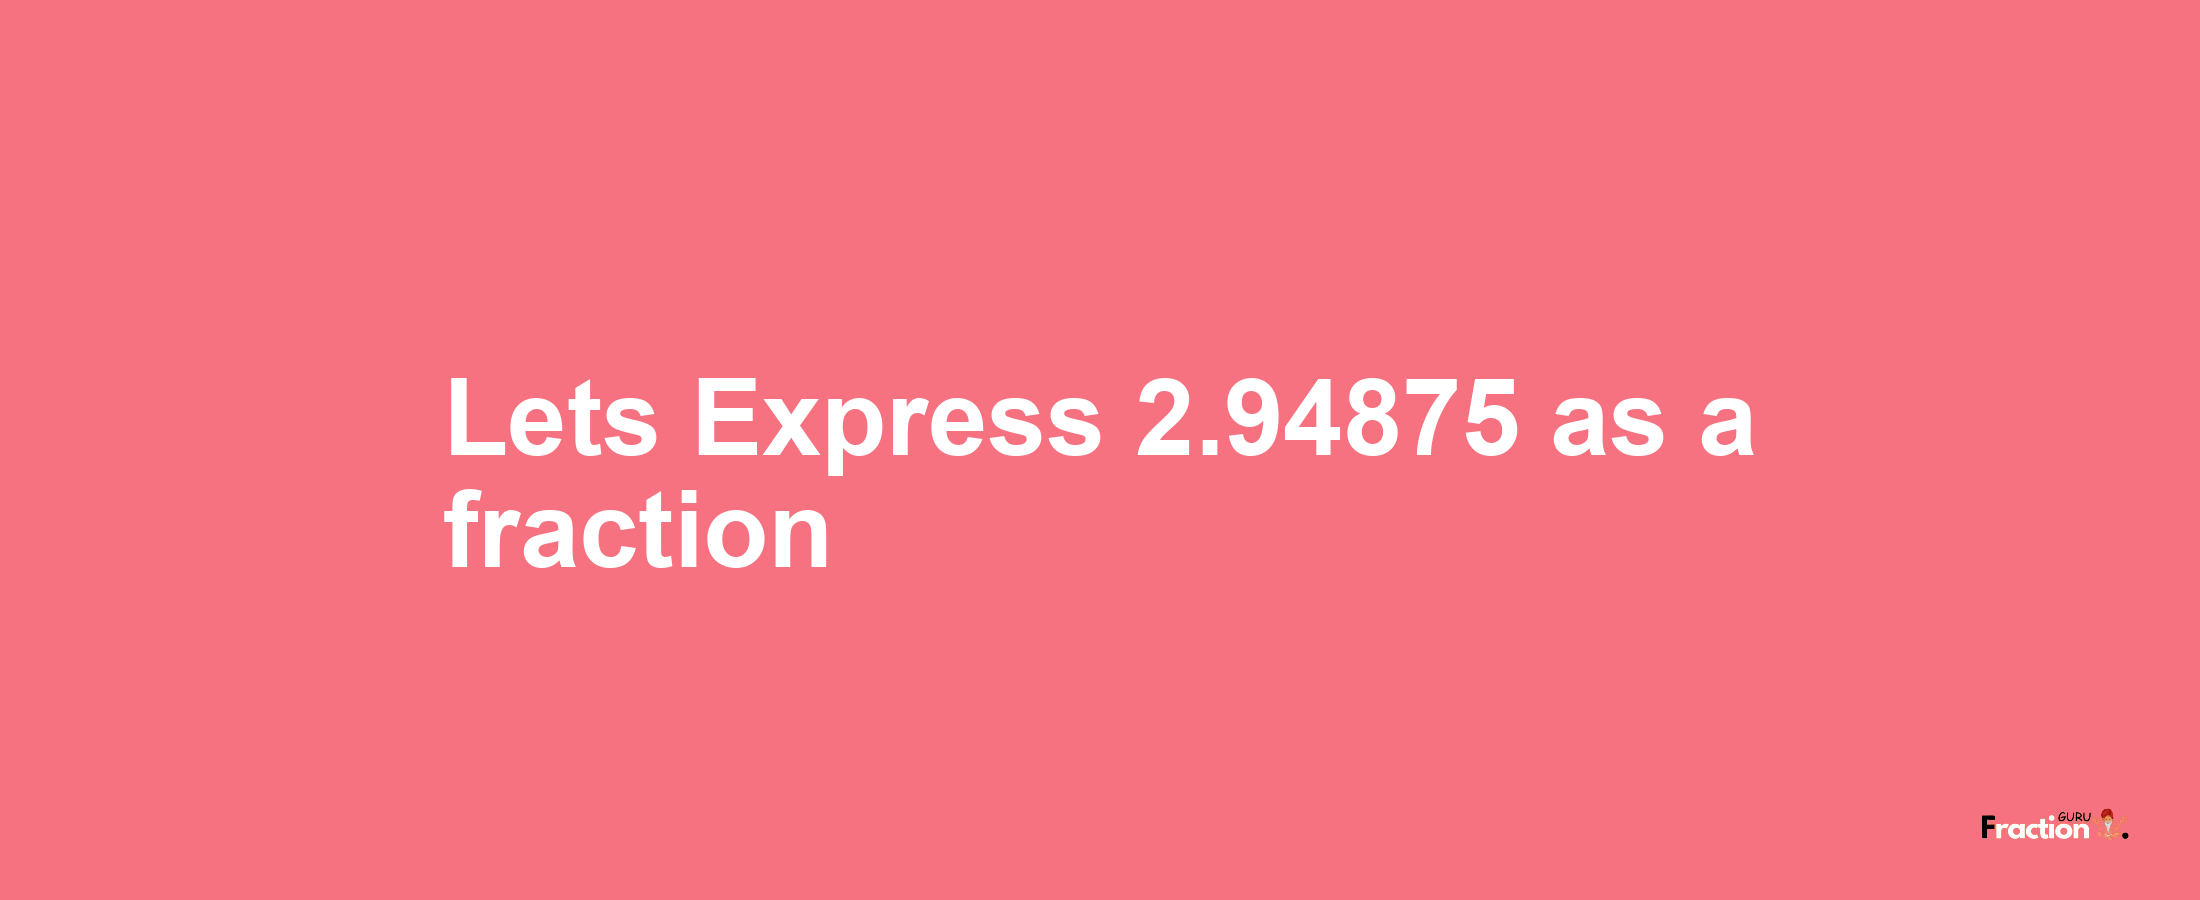 Lets Express 2.94875 as afraction